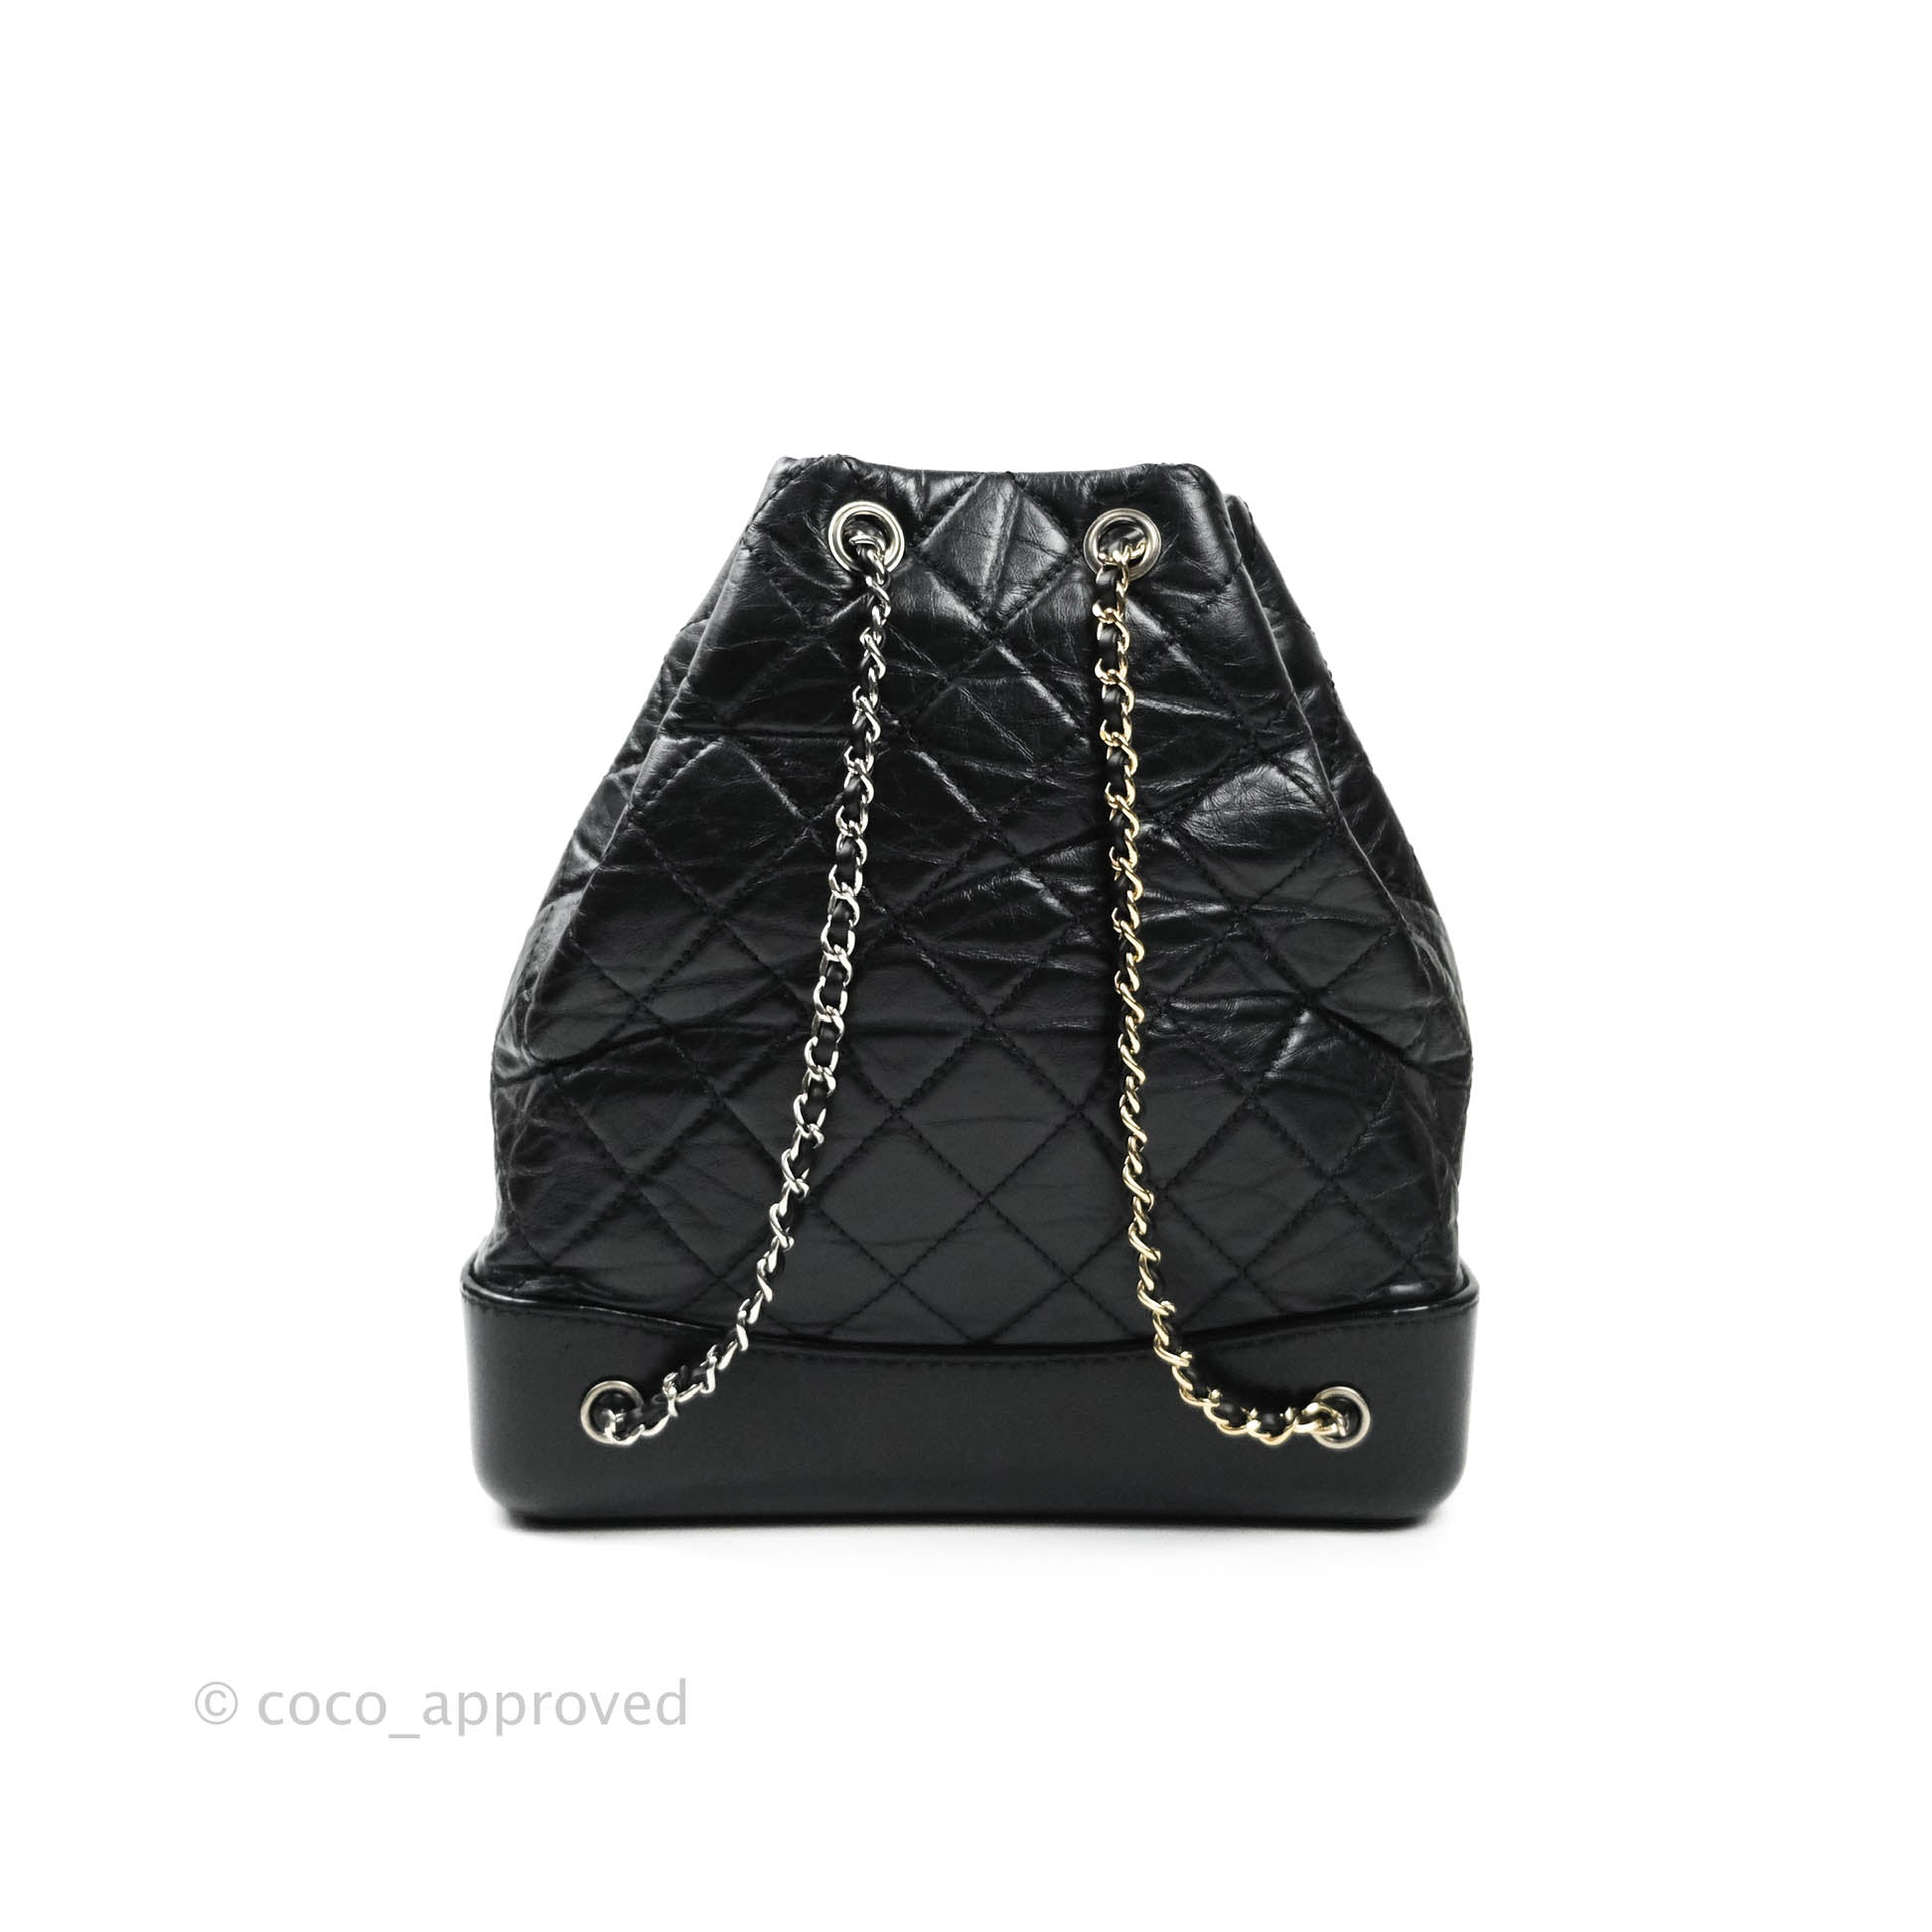 Chanel Medium Gabrielle Backpack Black Aged Calfskin – Coco Approved Studio